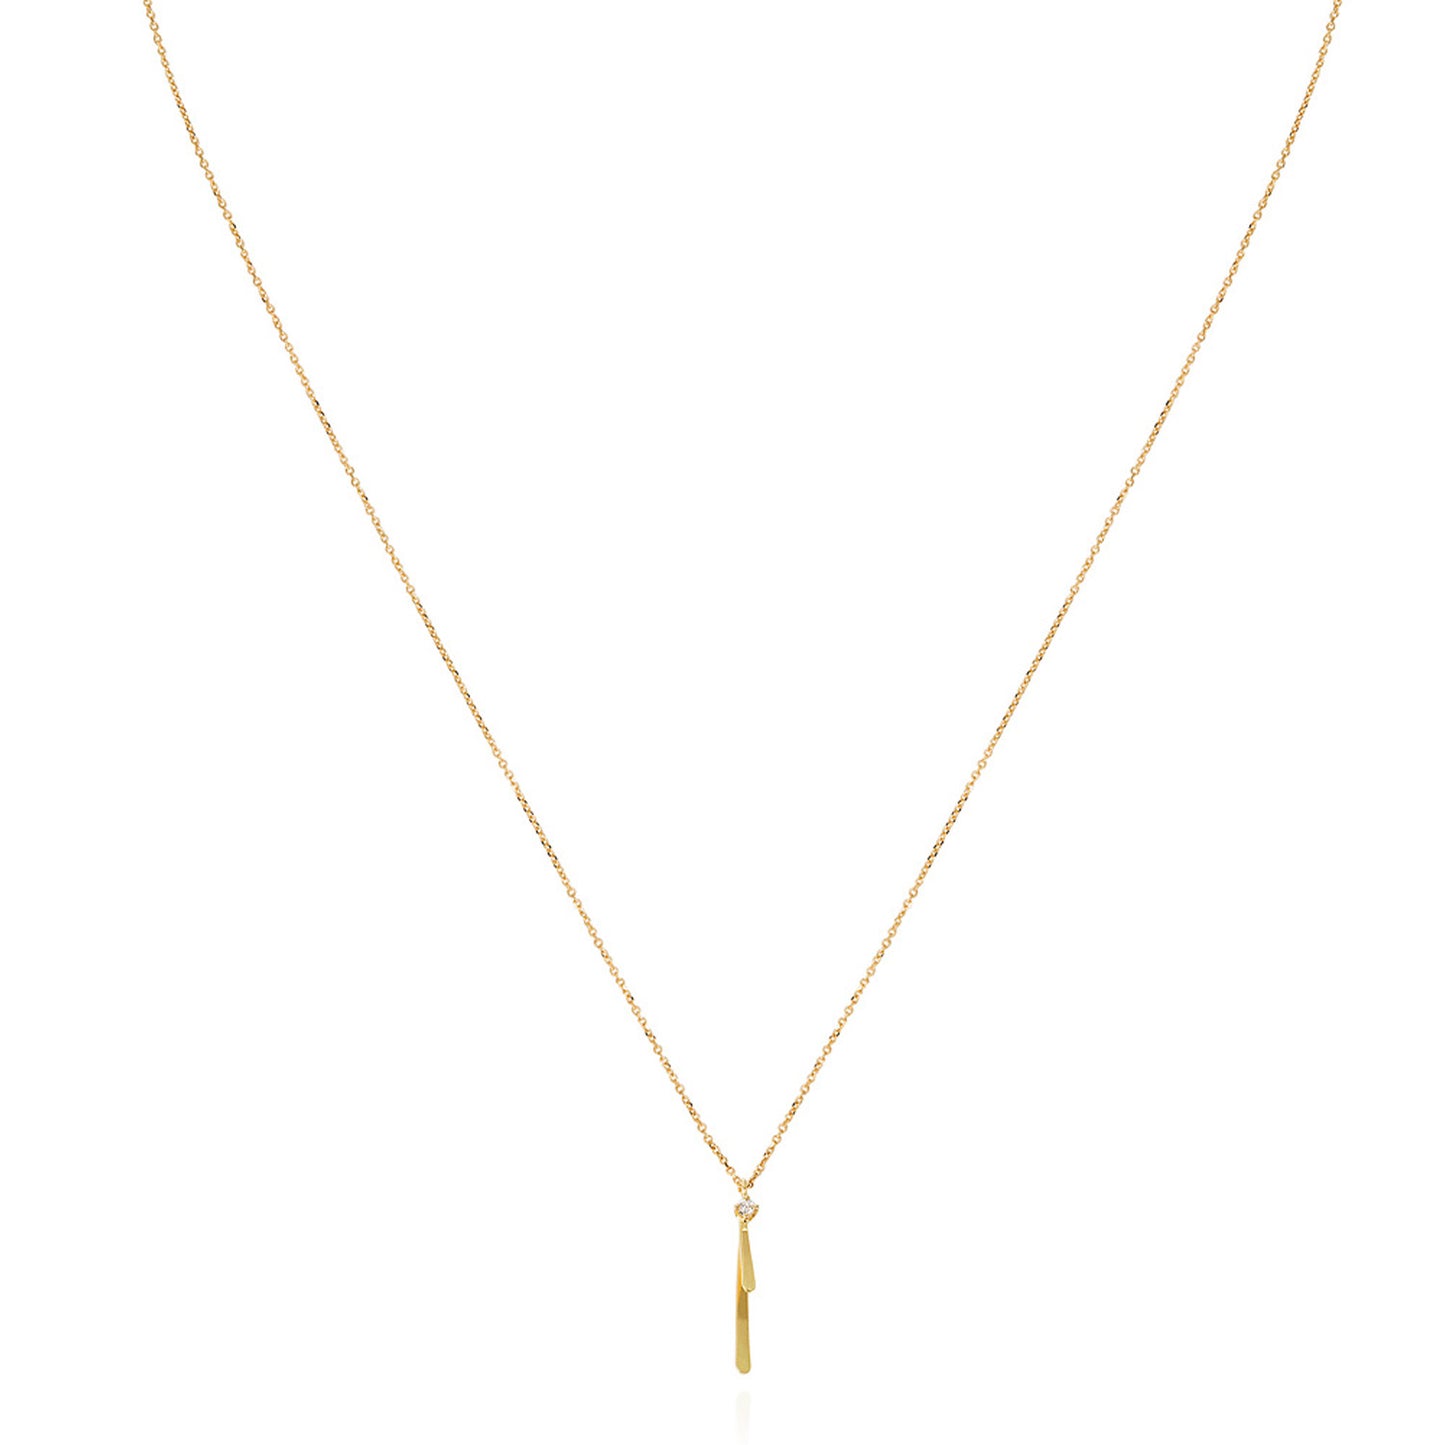 18ct gold fine chain necklace with golden bar and diamond pendant